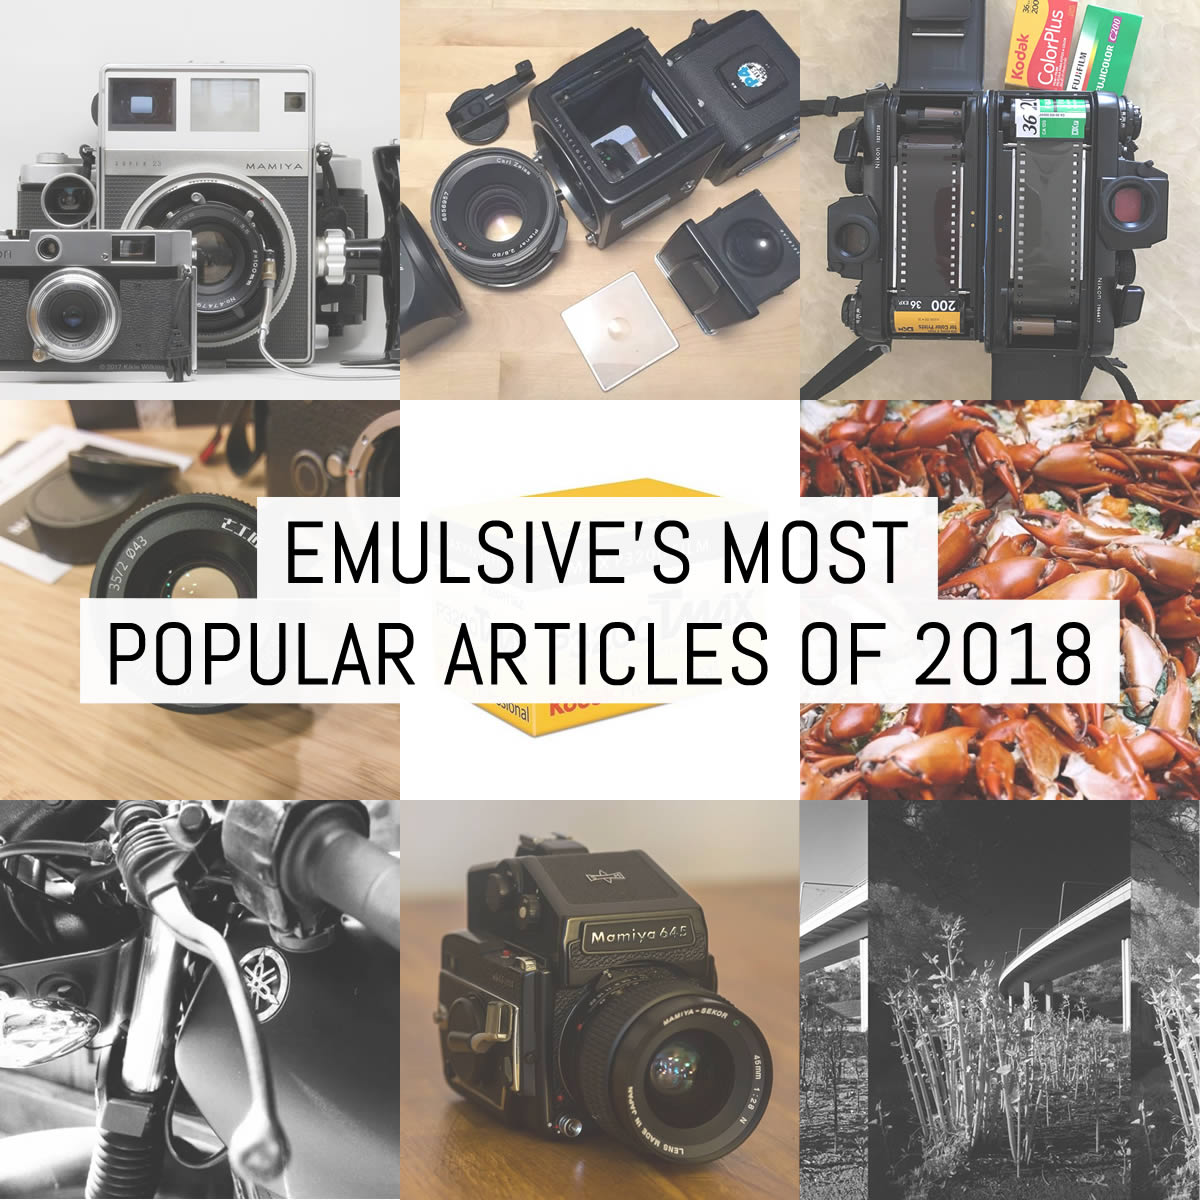 EMULSIVE’s most popular articles of 2018